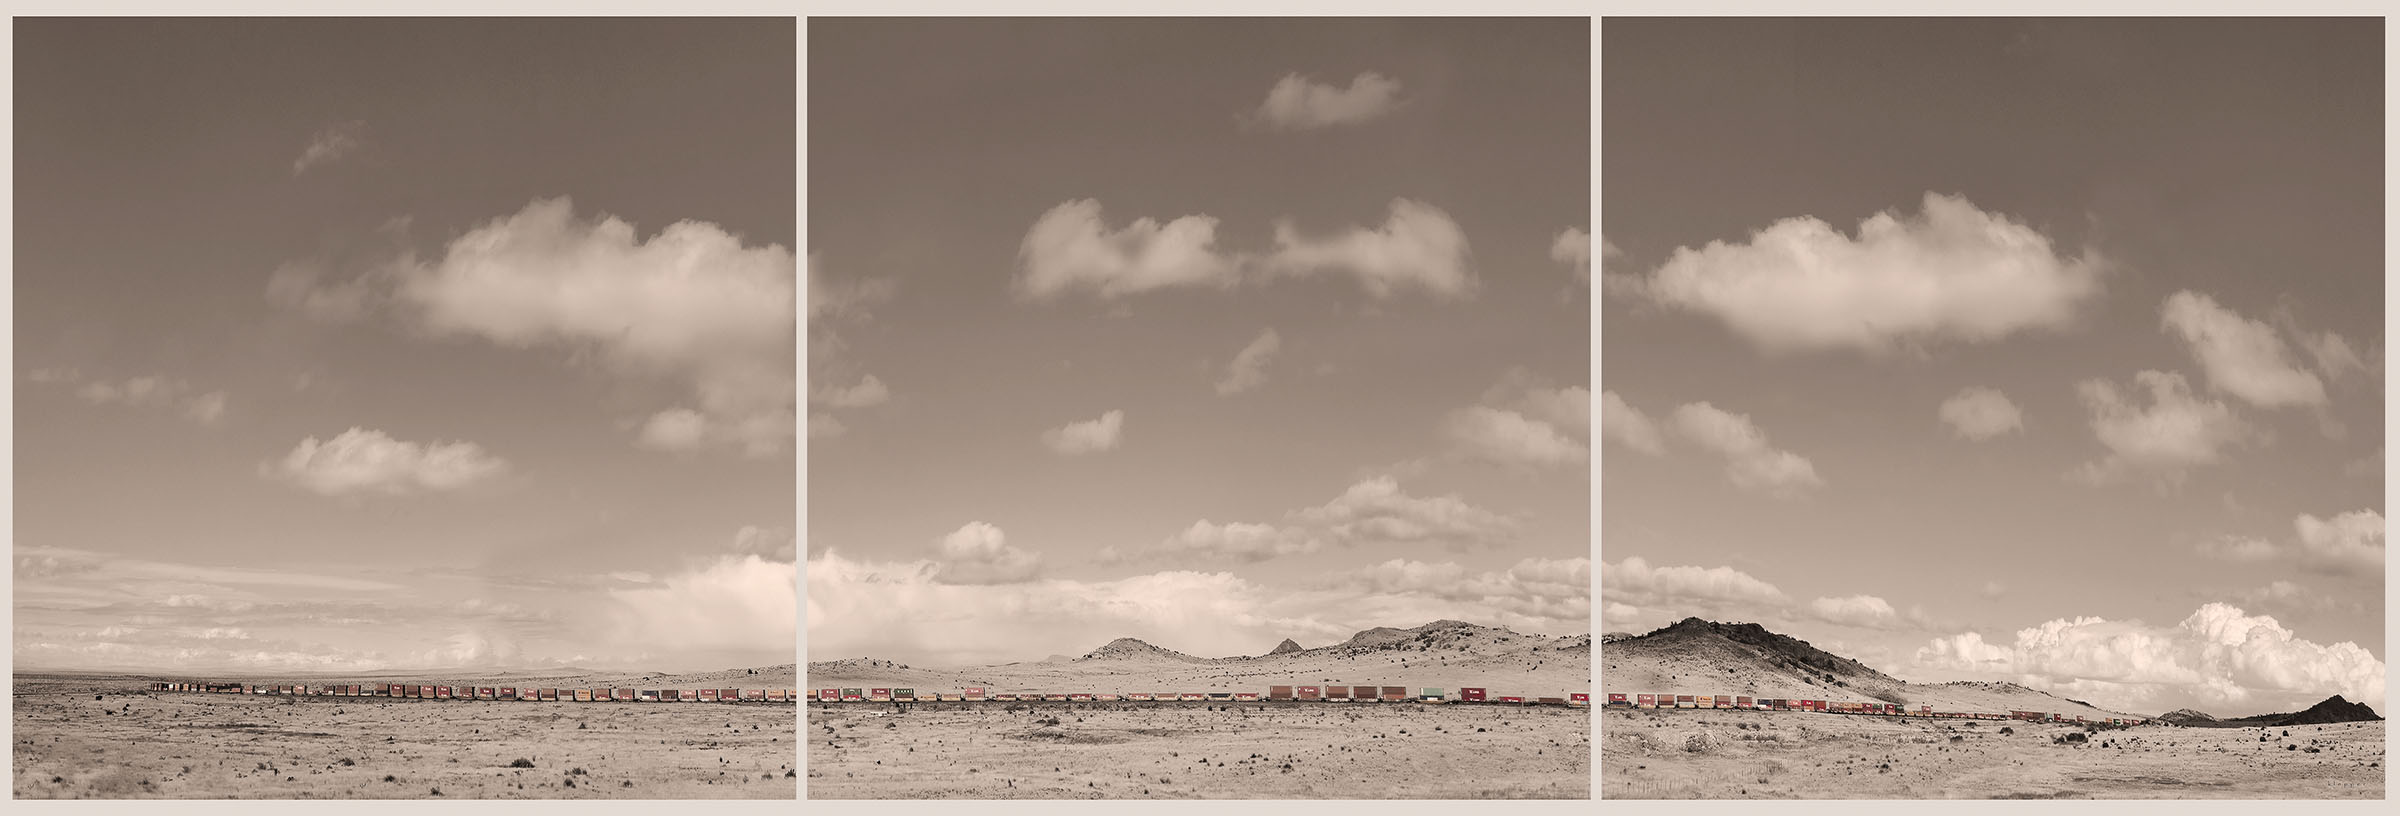 Three images forming a panorama of a freight train moving across the Marfa plateau under a sky with a few clouds